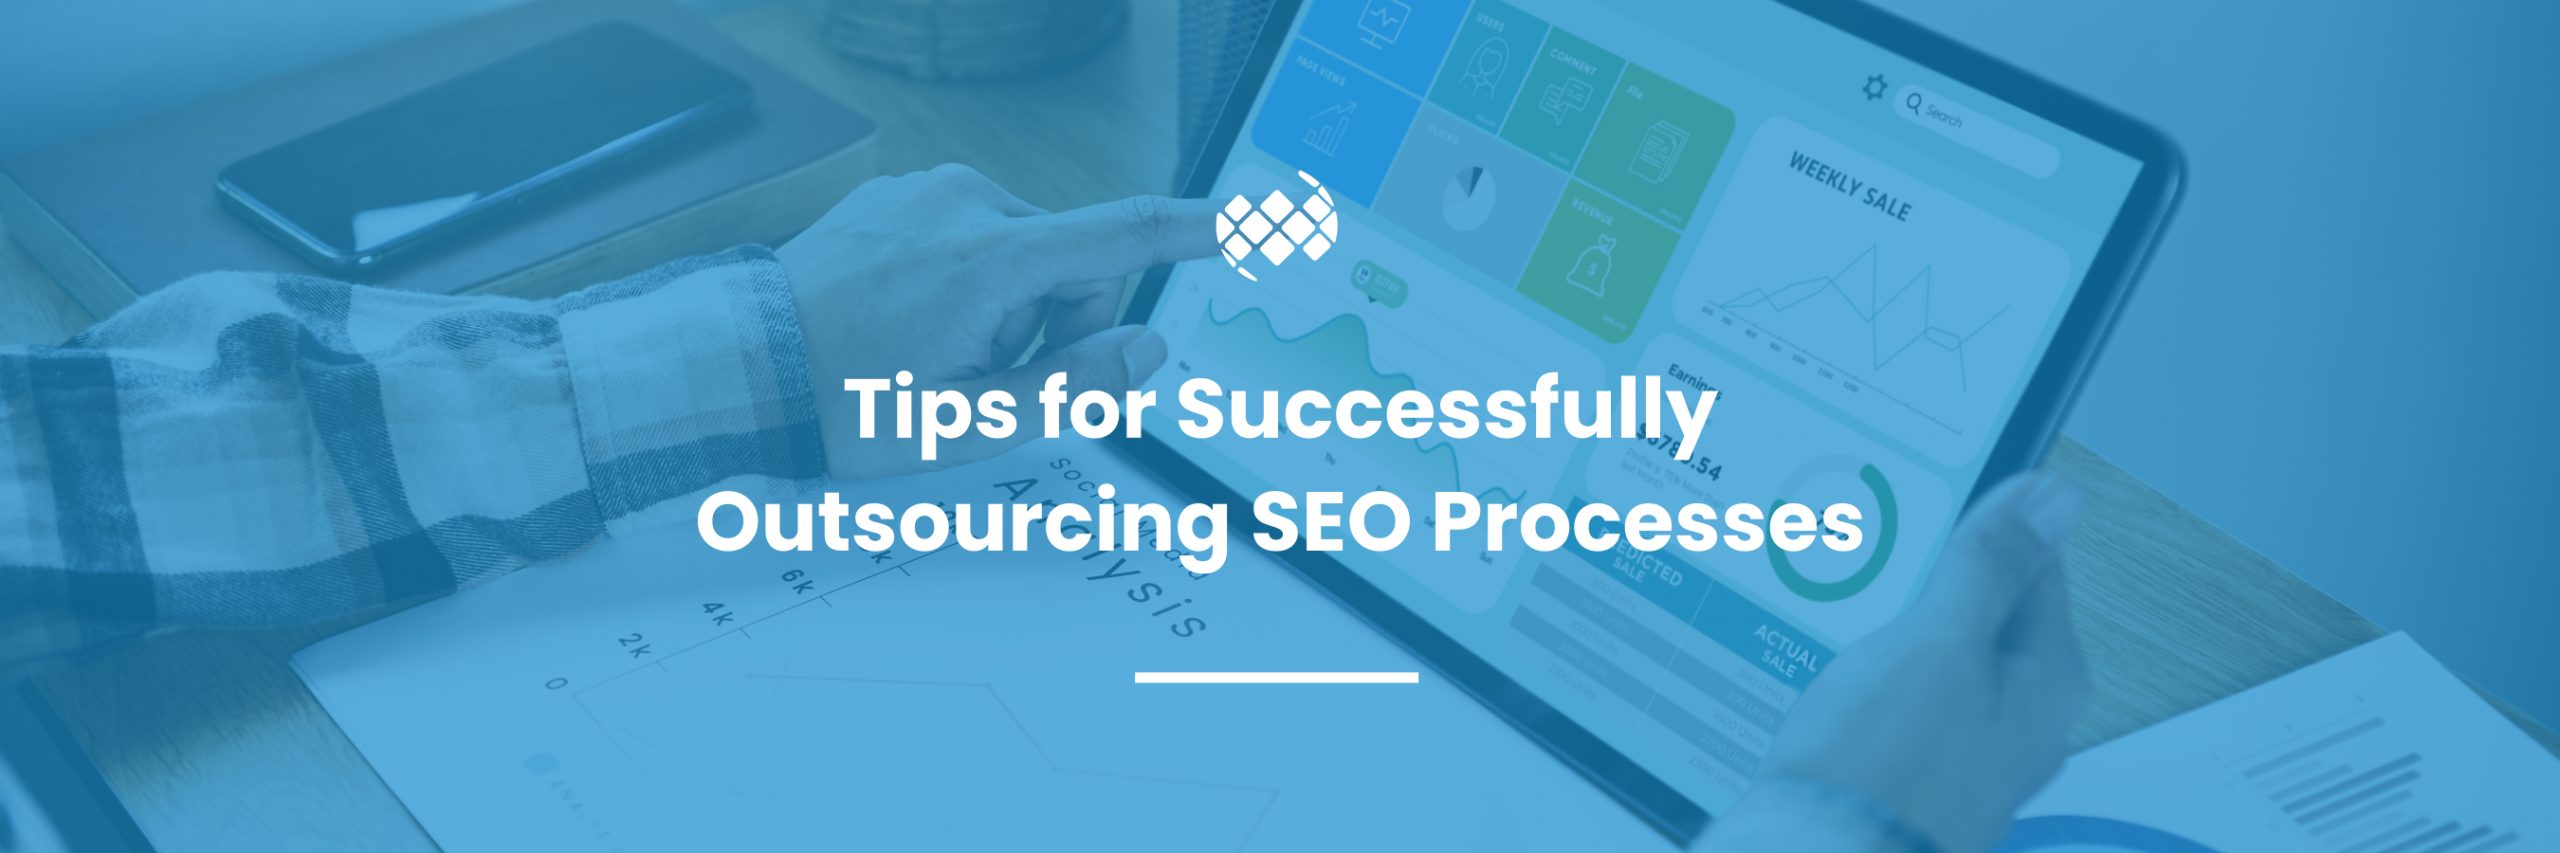 tips for successfully outsourcing seo processes